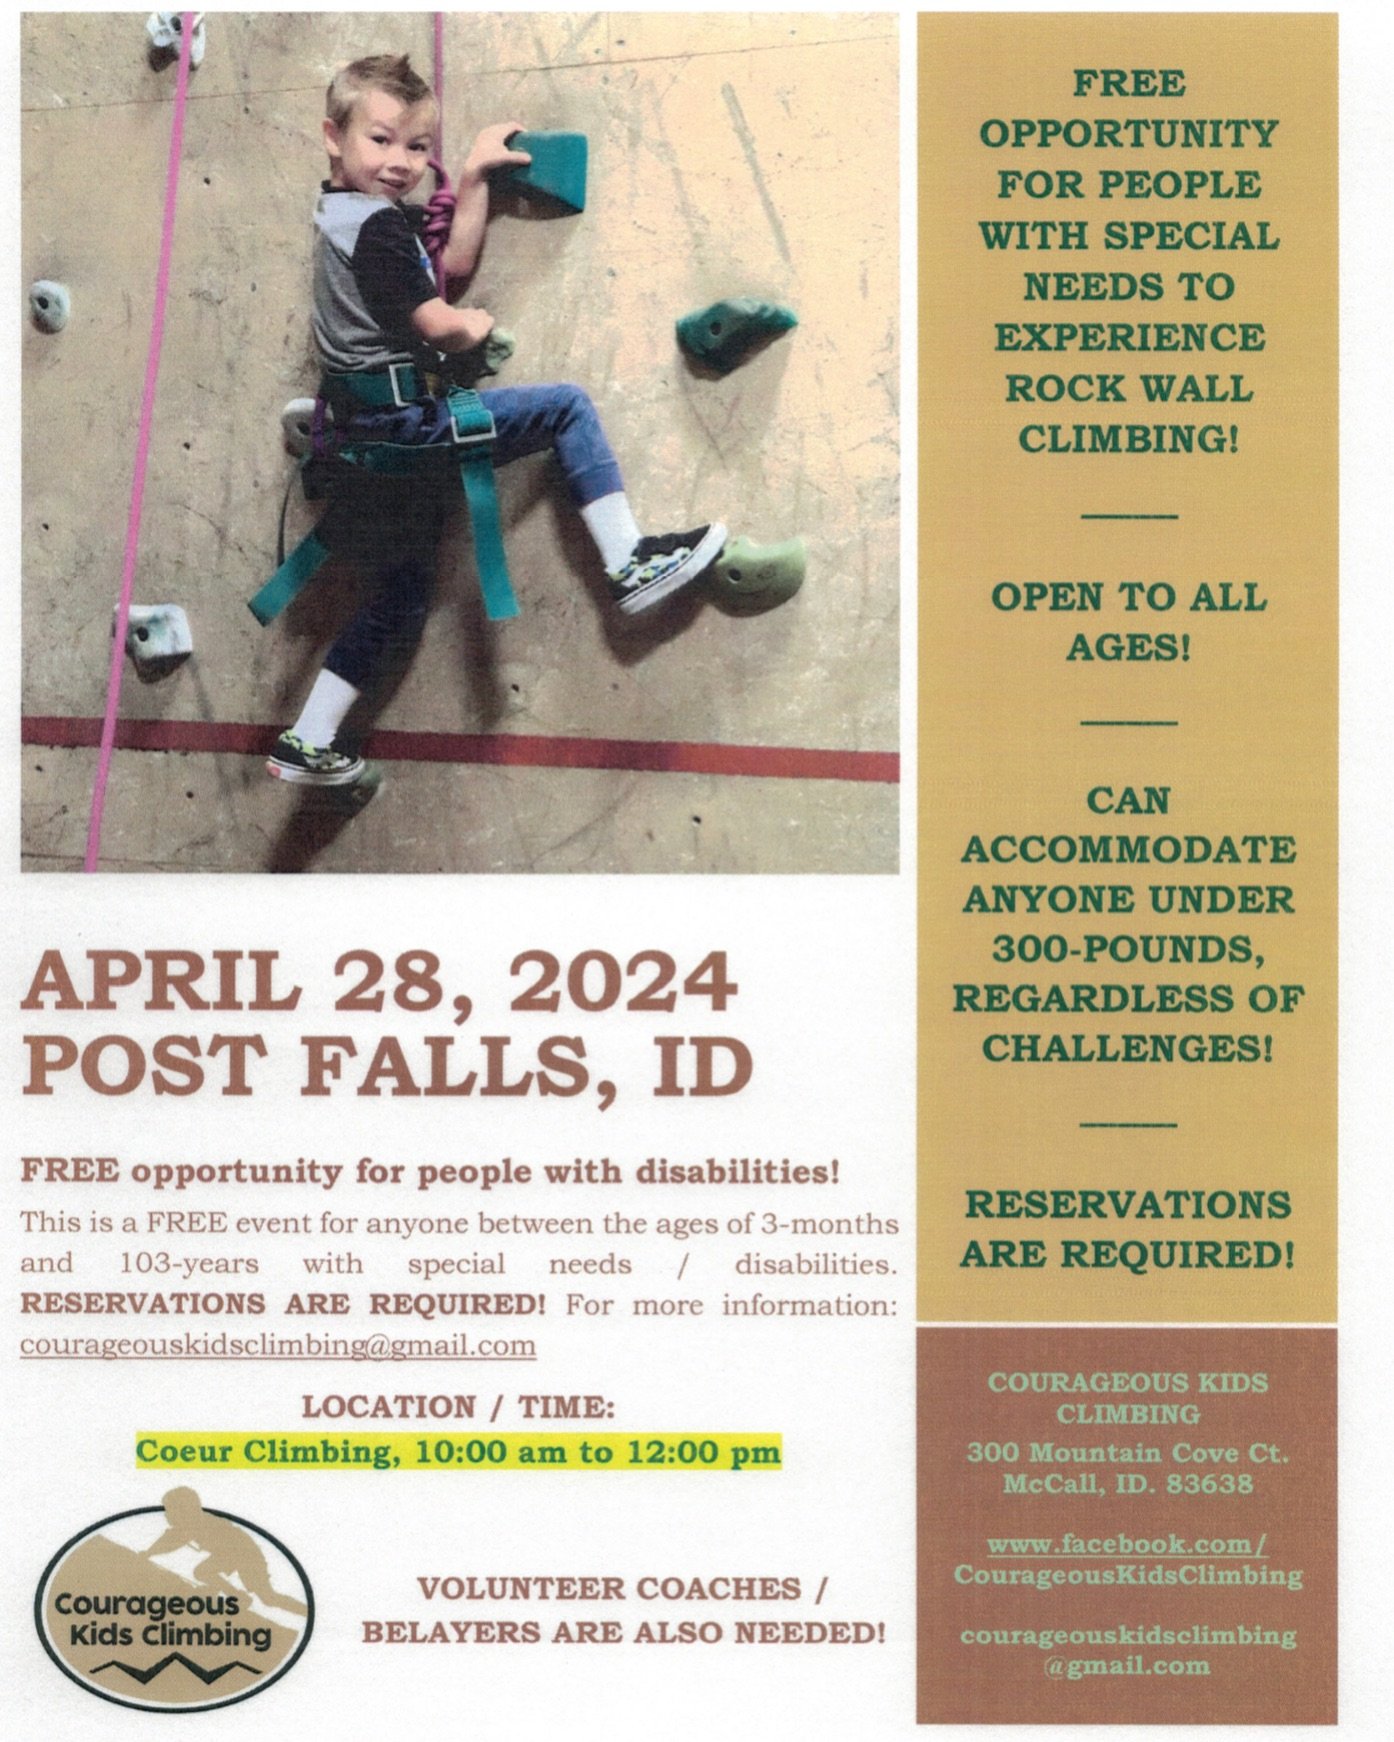 We are helping put on this great event to get kids with disabilities up on the climbing walls! If you know of anyone interested in this event, let them know! There are still spots left for it!